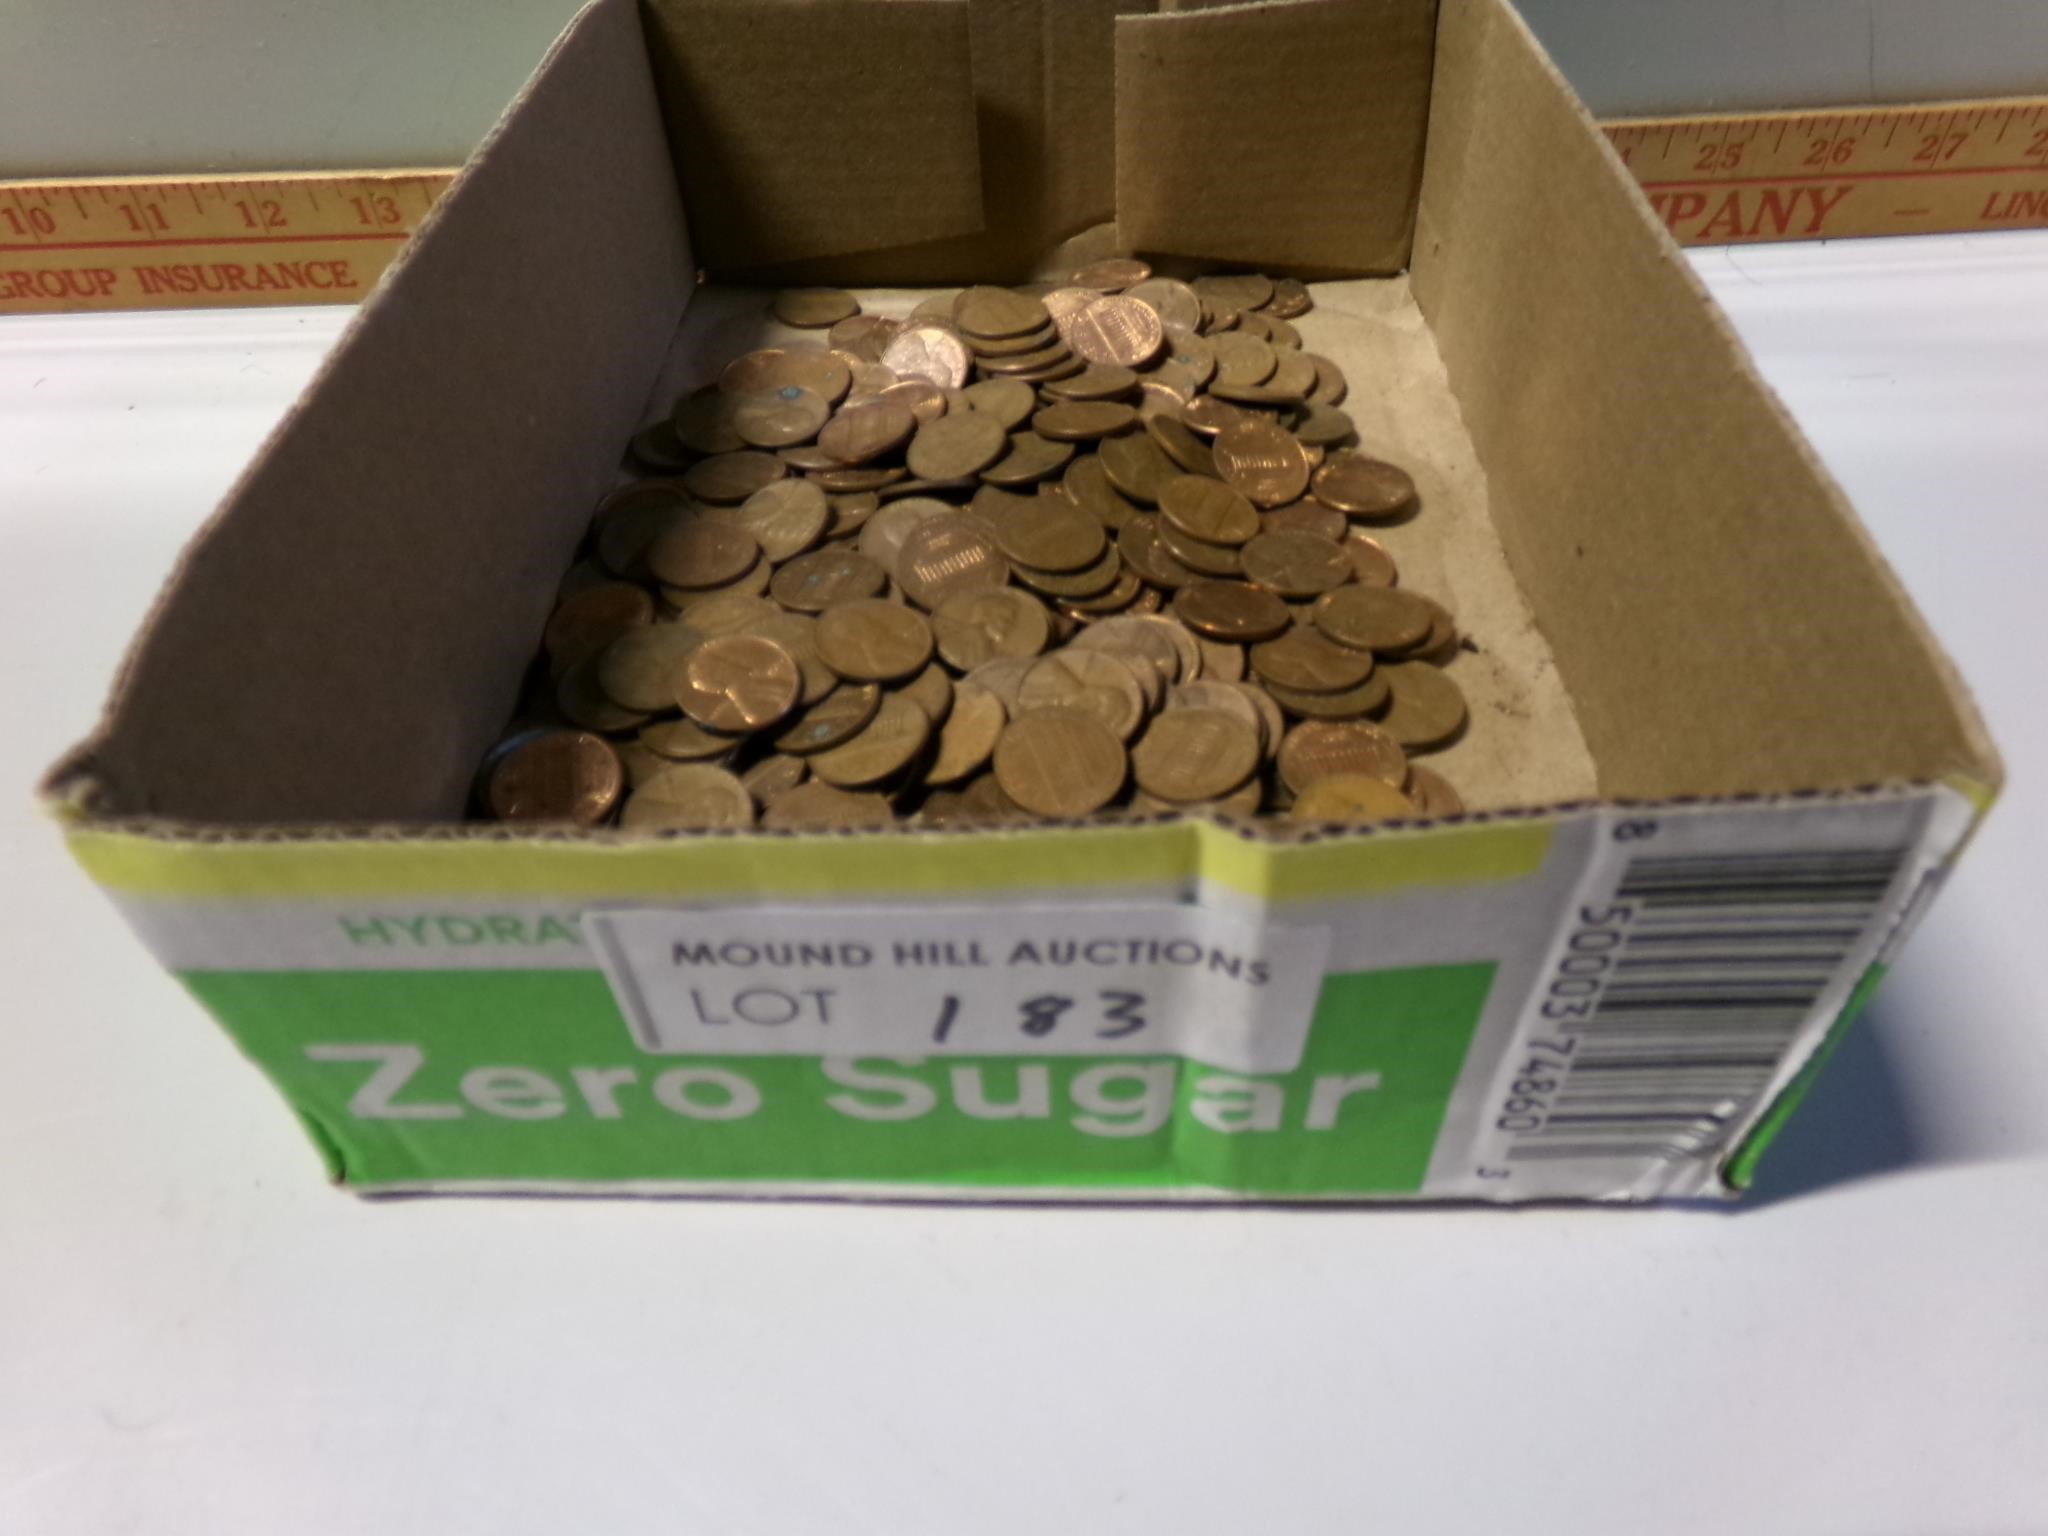 Approx 250 pennies